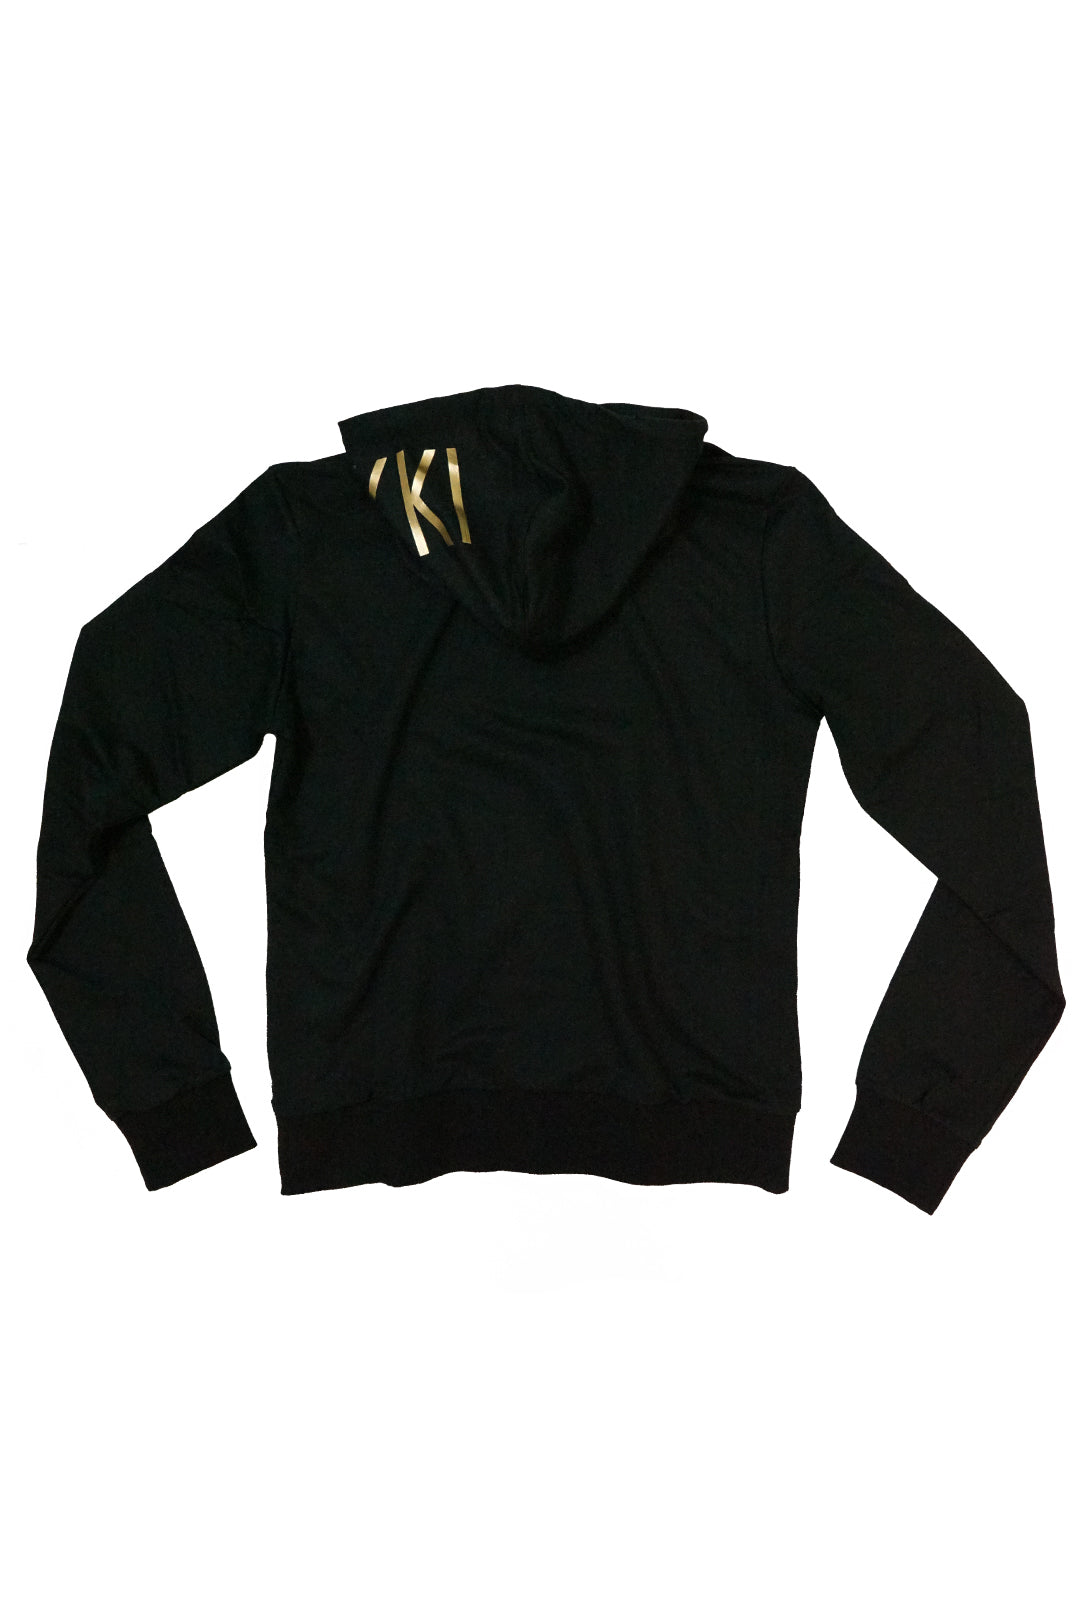 ALWS Pullover - the Black and Gold RÄÄKKI (Womens)